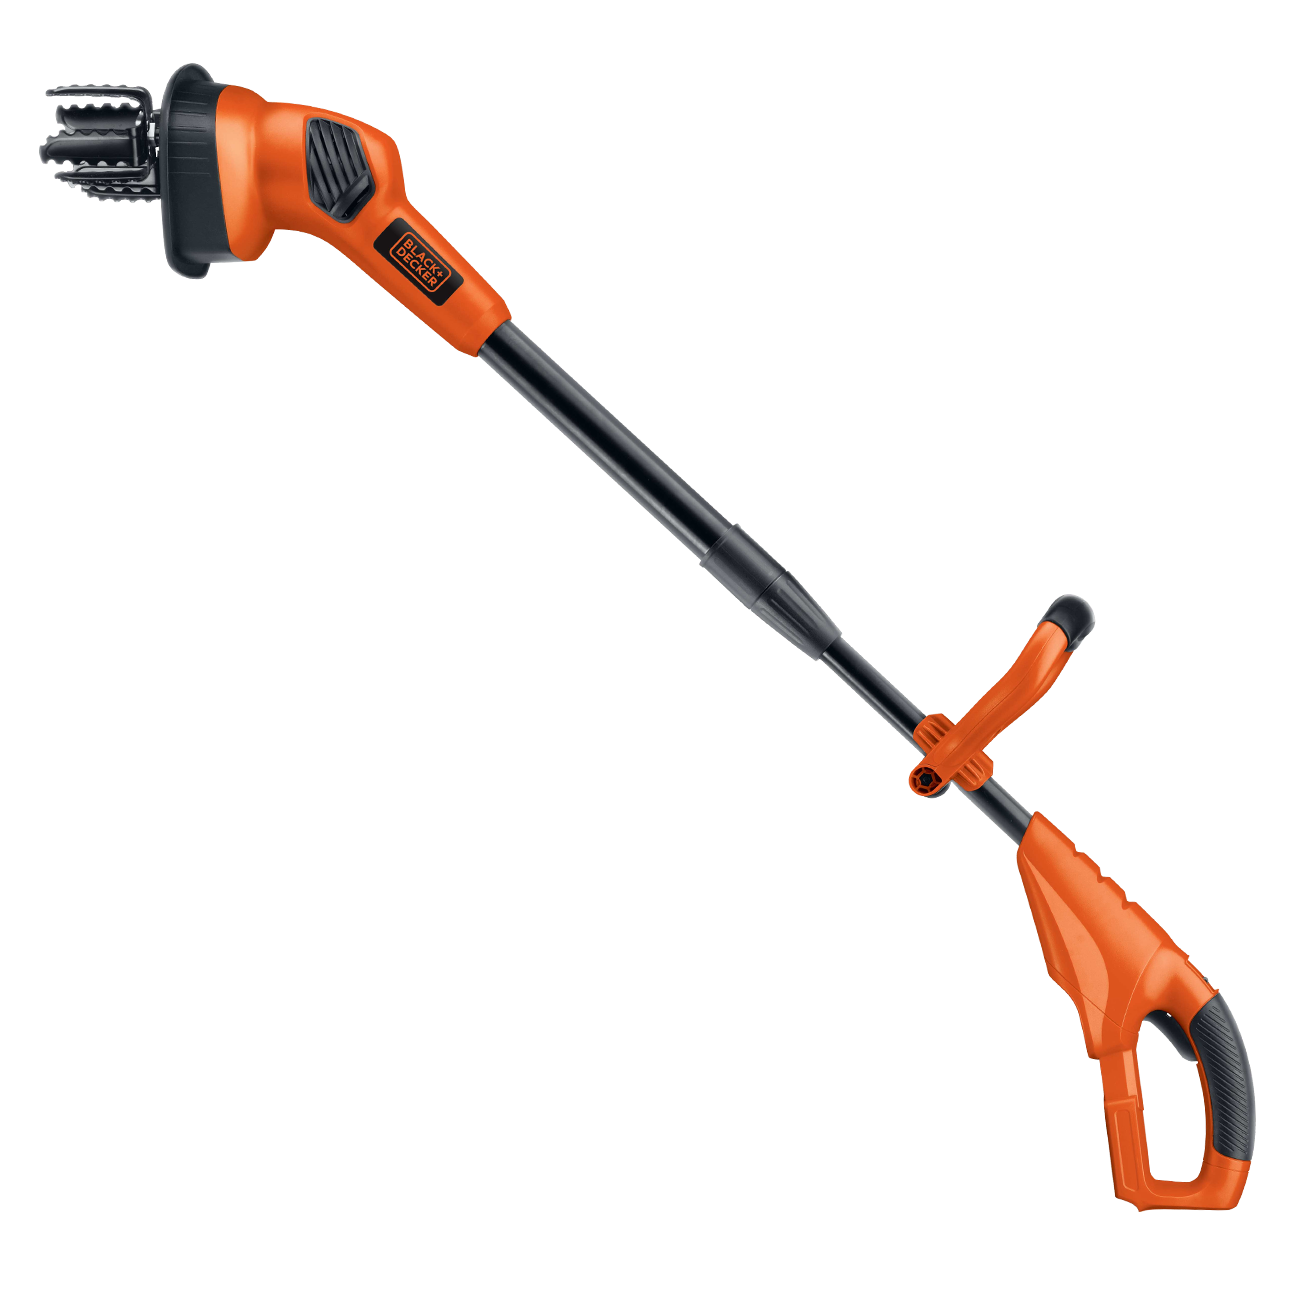 Cultivate your yard with BLACK+DECKER's 20V MAX Tiller Kit at all